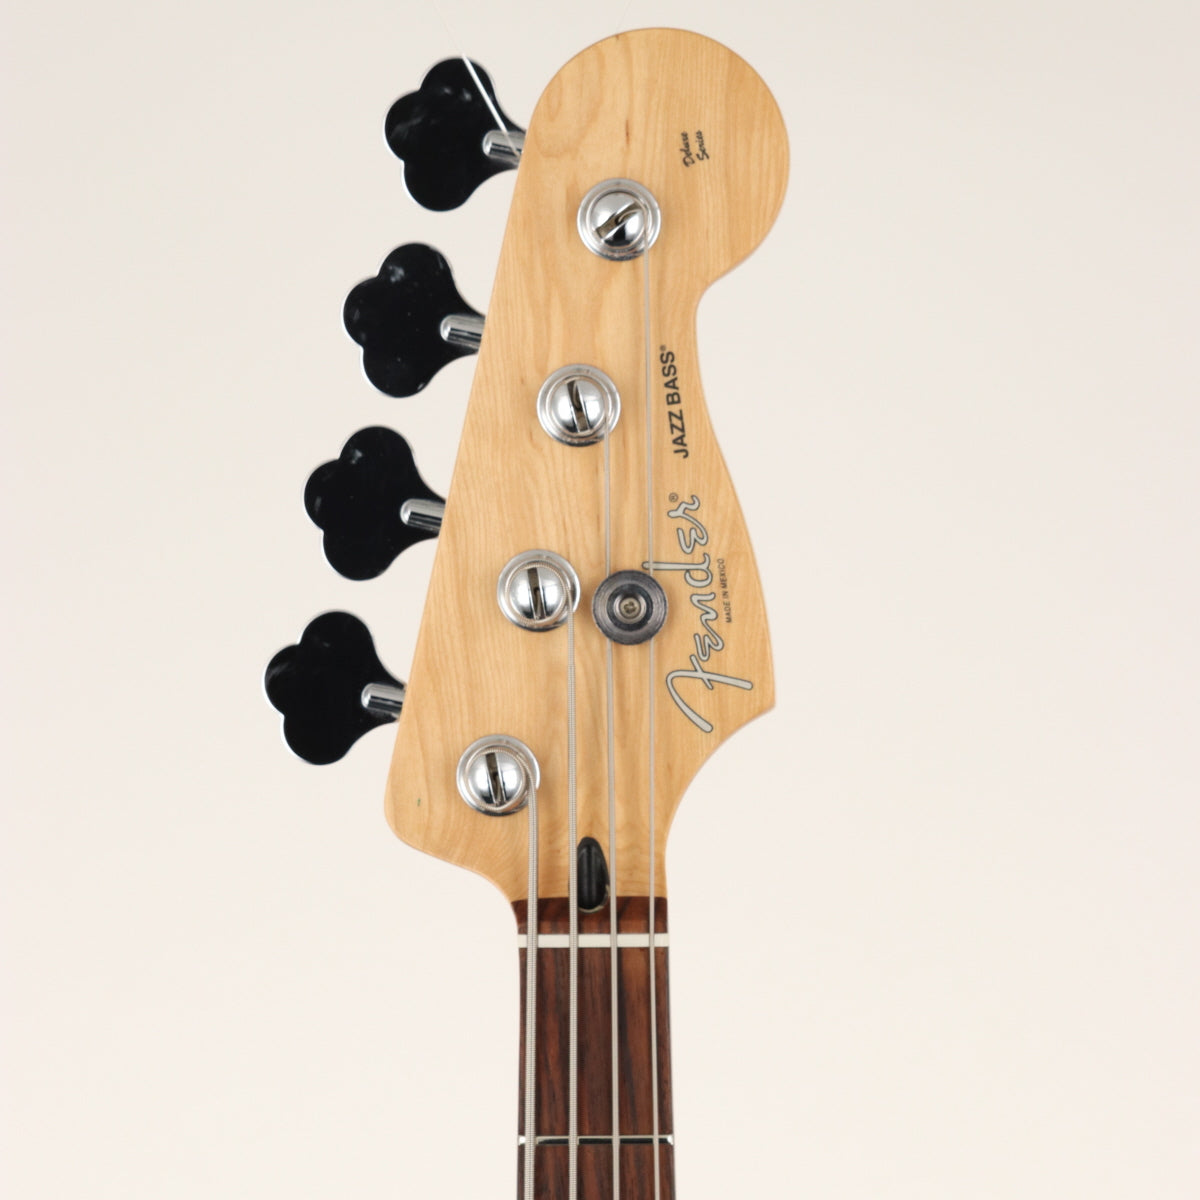 [SN MX11041358] USED Fender Mexico Fender Mexico / Deluxe Active Jazz Bass  3-Color Sunburst [20]